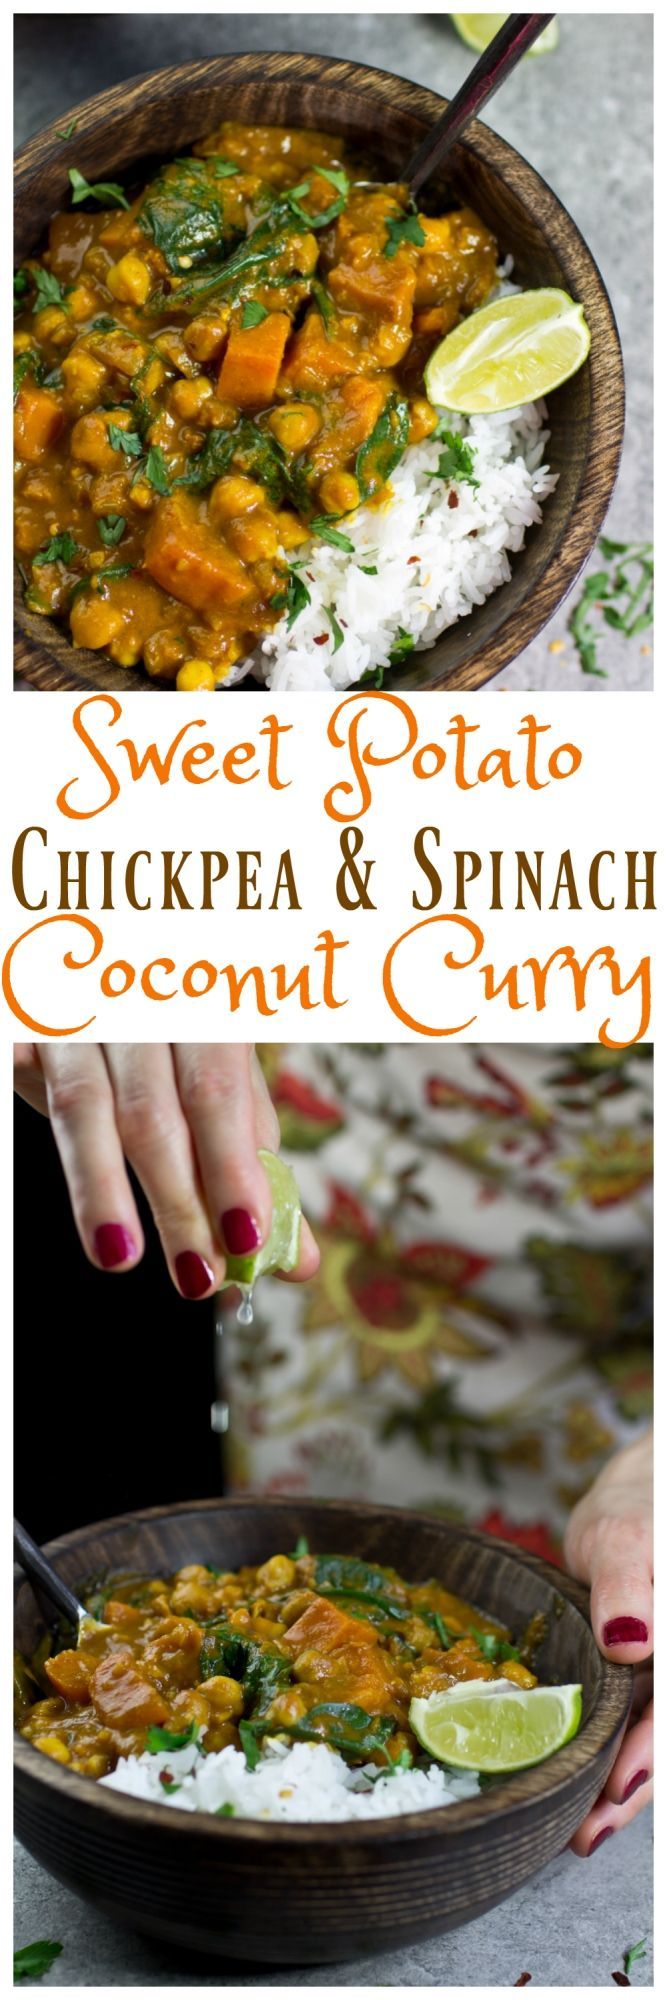 Sweet Potato, Chickpea and Spinach Coconut Curry -   19 indian vegan recipes
 ideas